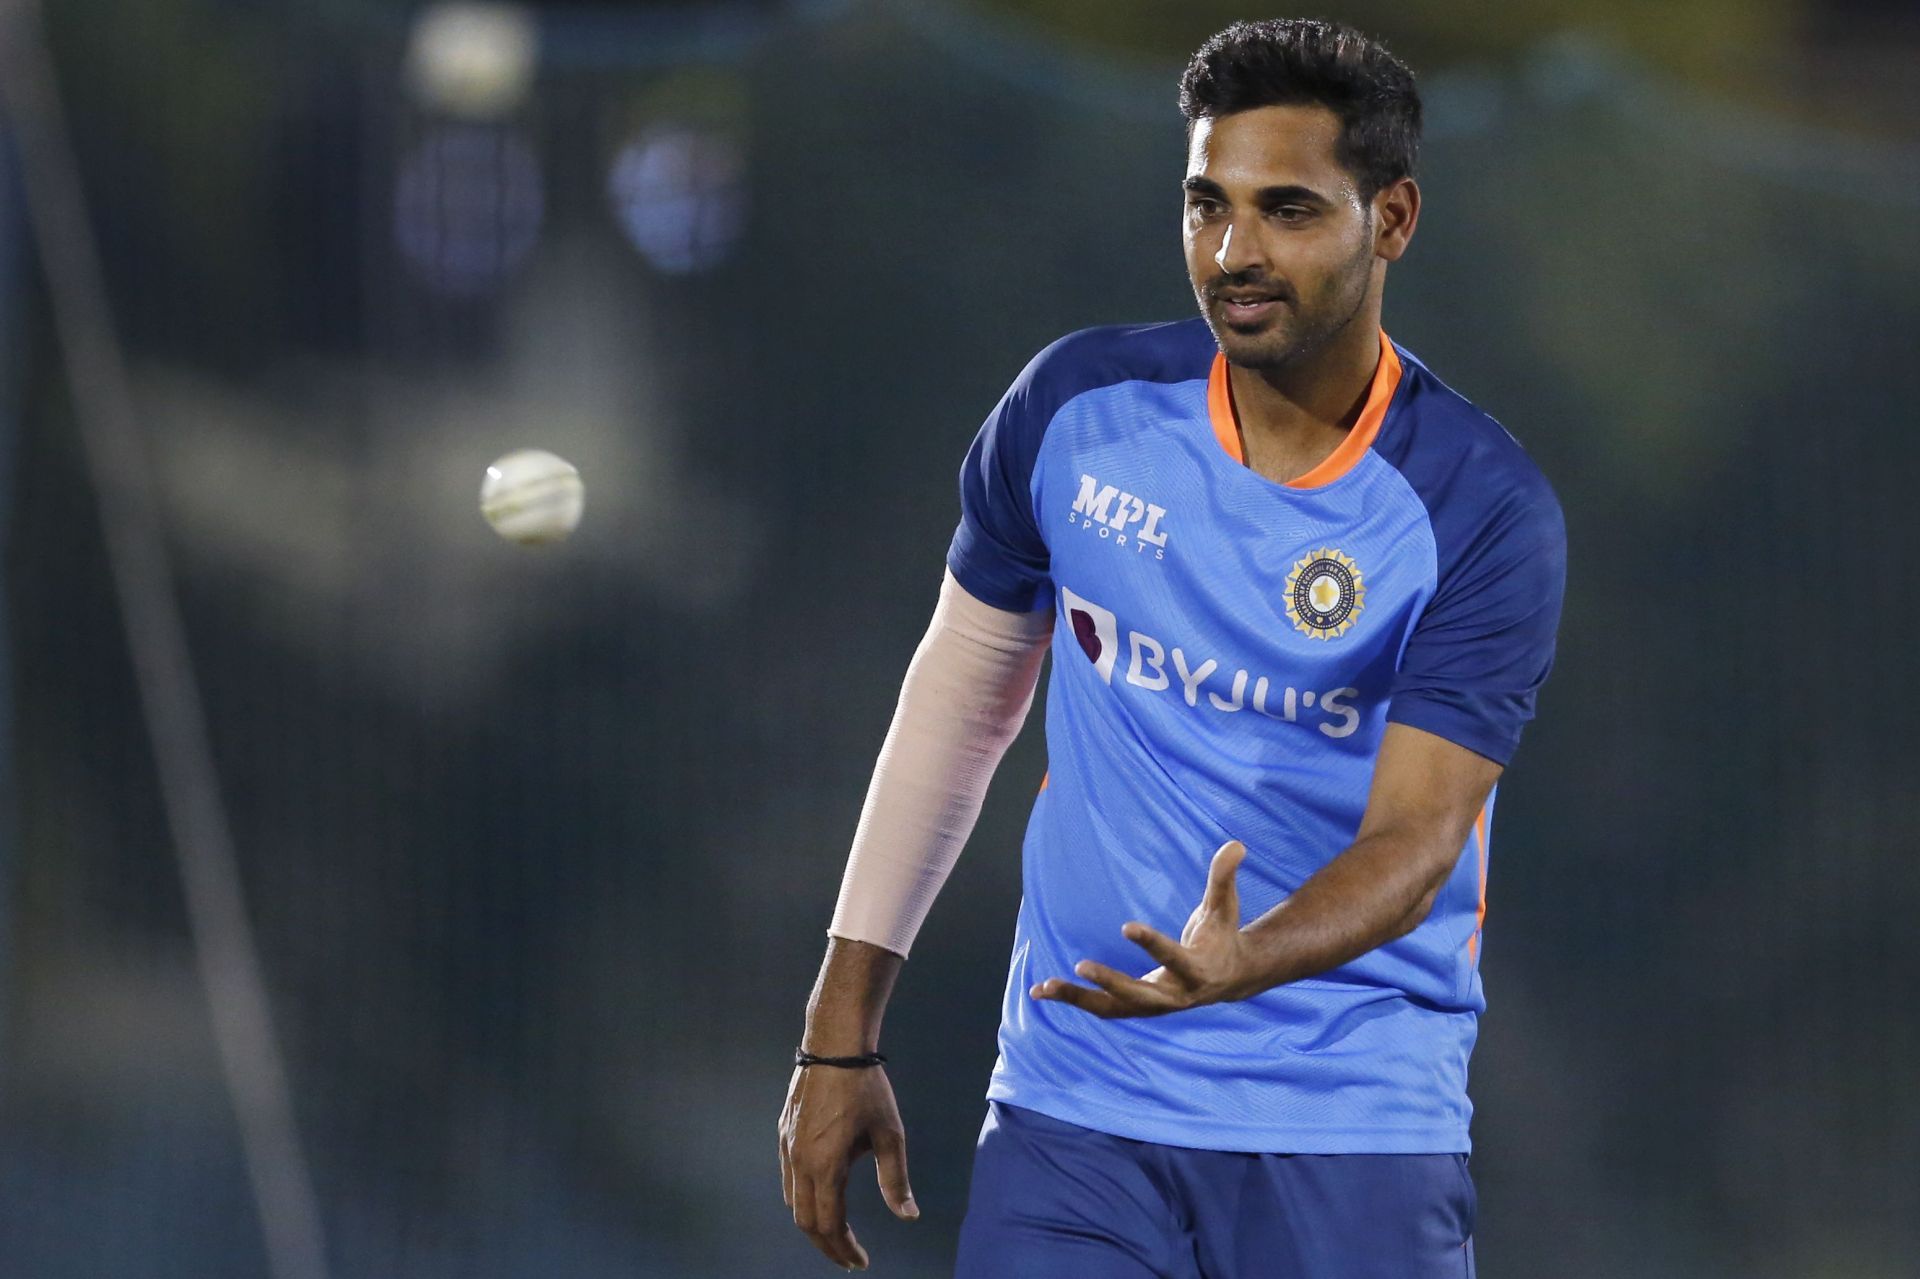 Swing specialist Bhuvneshwar Kumar is expected to lead the Indian pace attack in the tournament